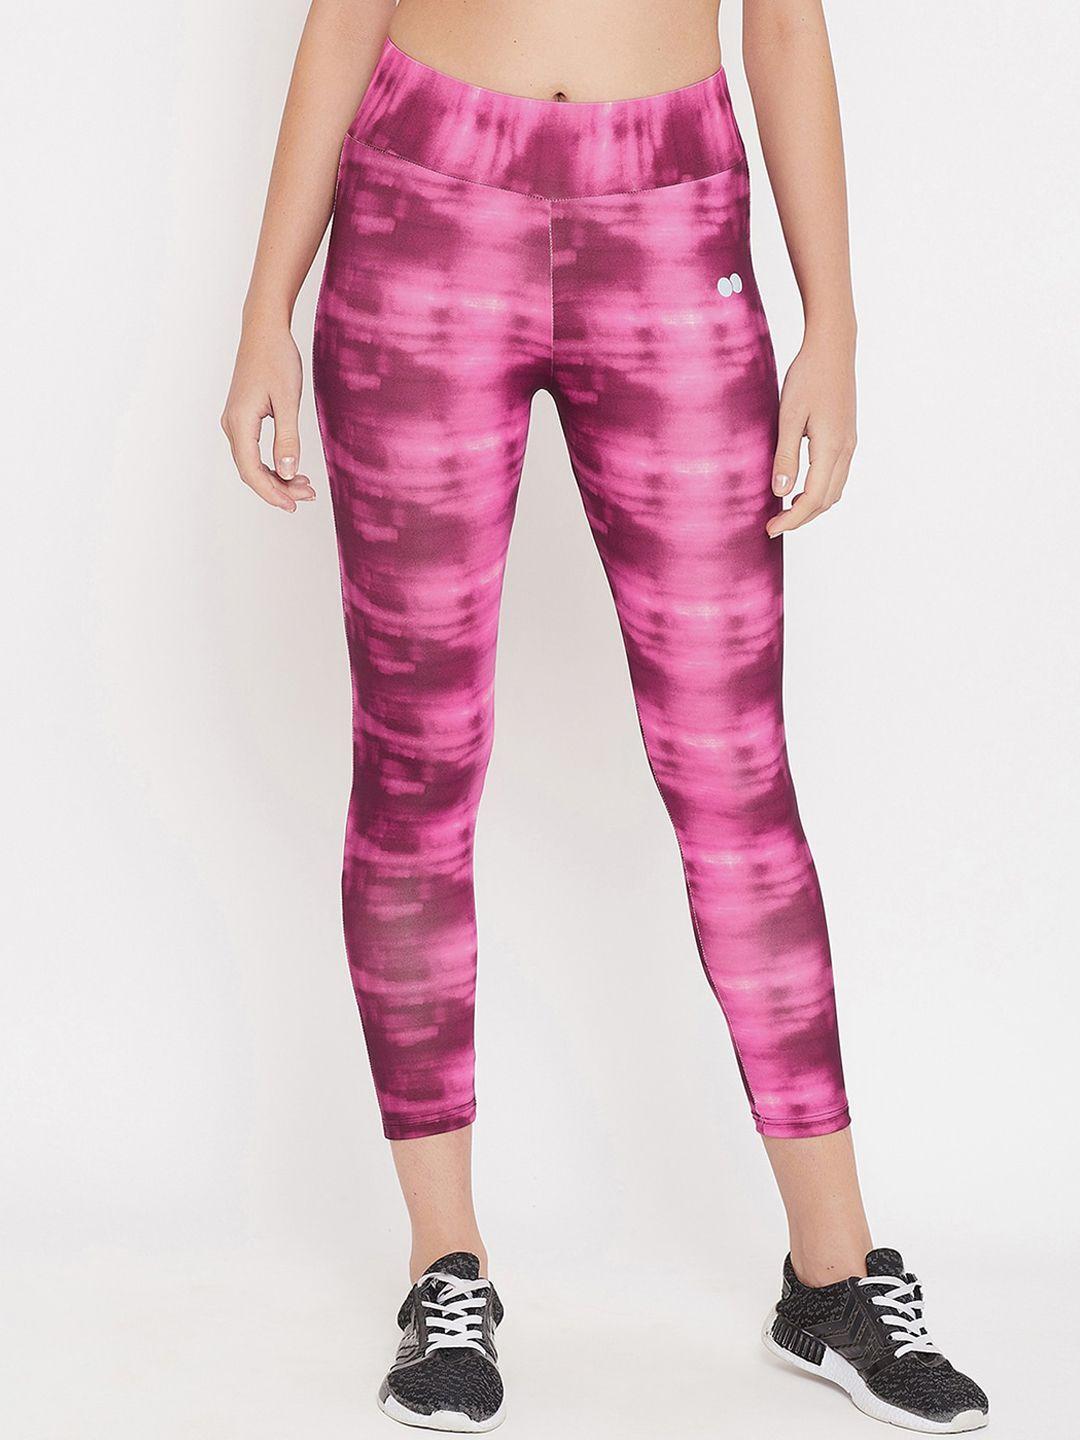 clovia-women-pink-tie-&-dye-printed-activewear-ankle-length-sports-tights